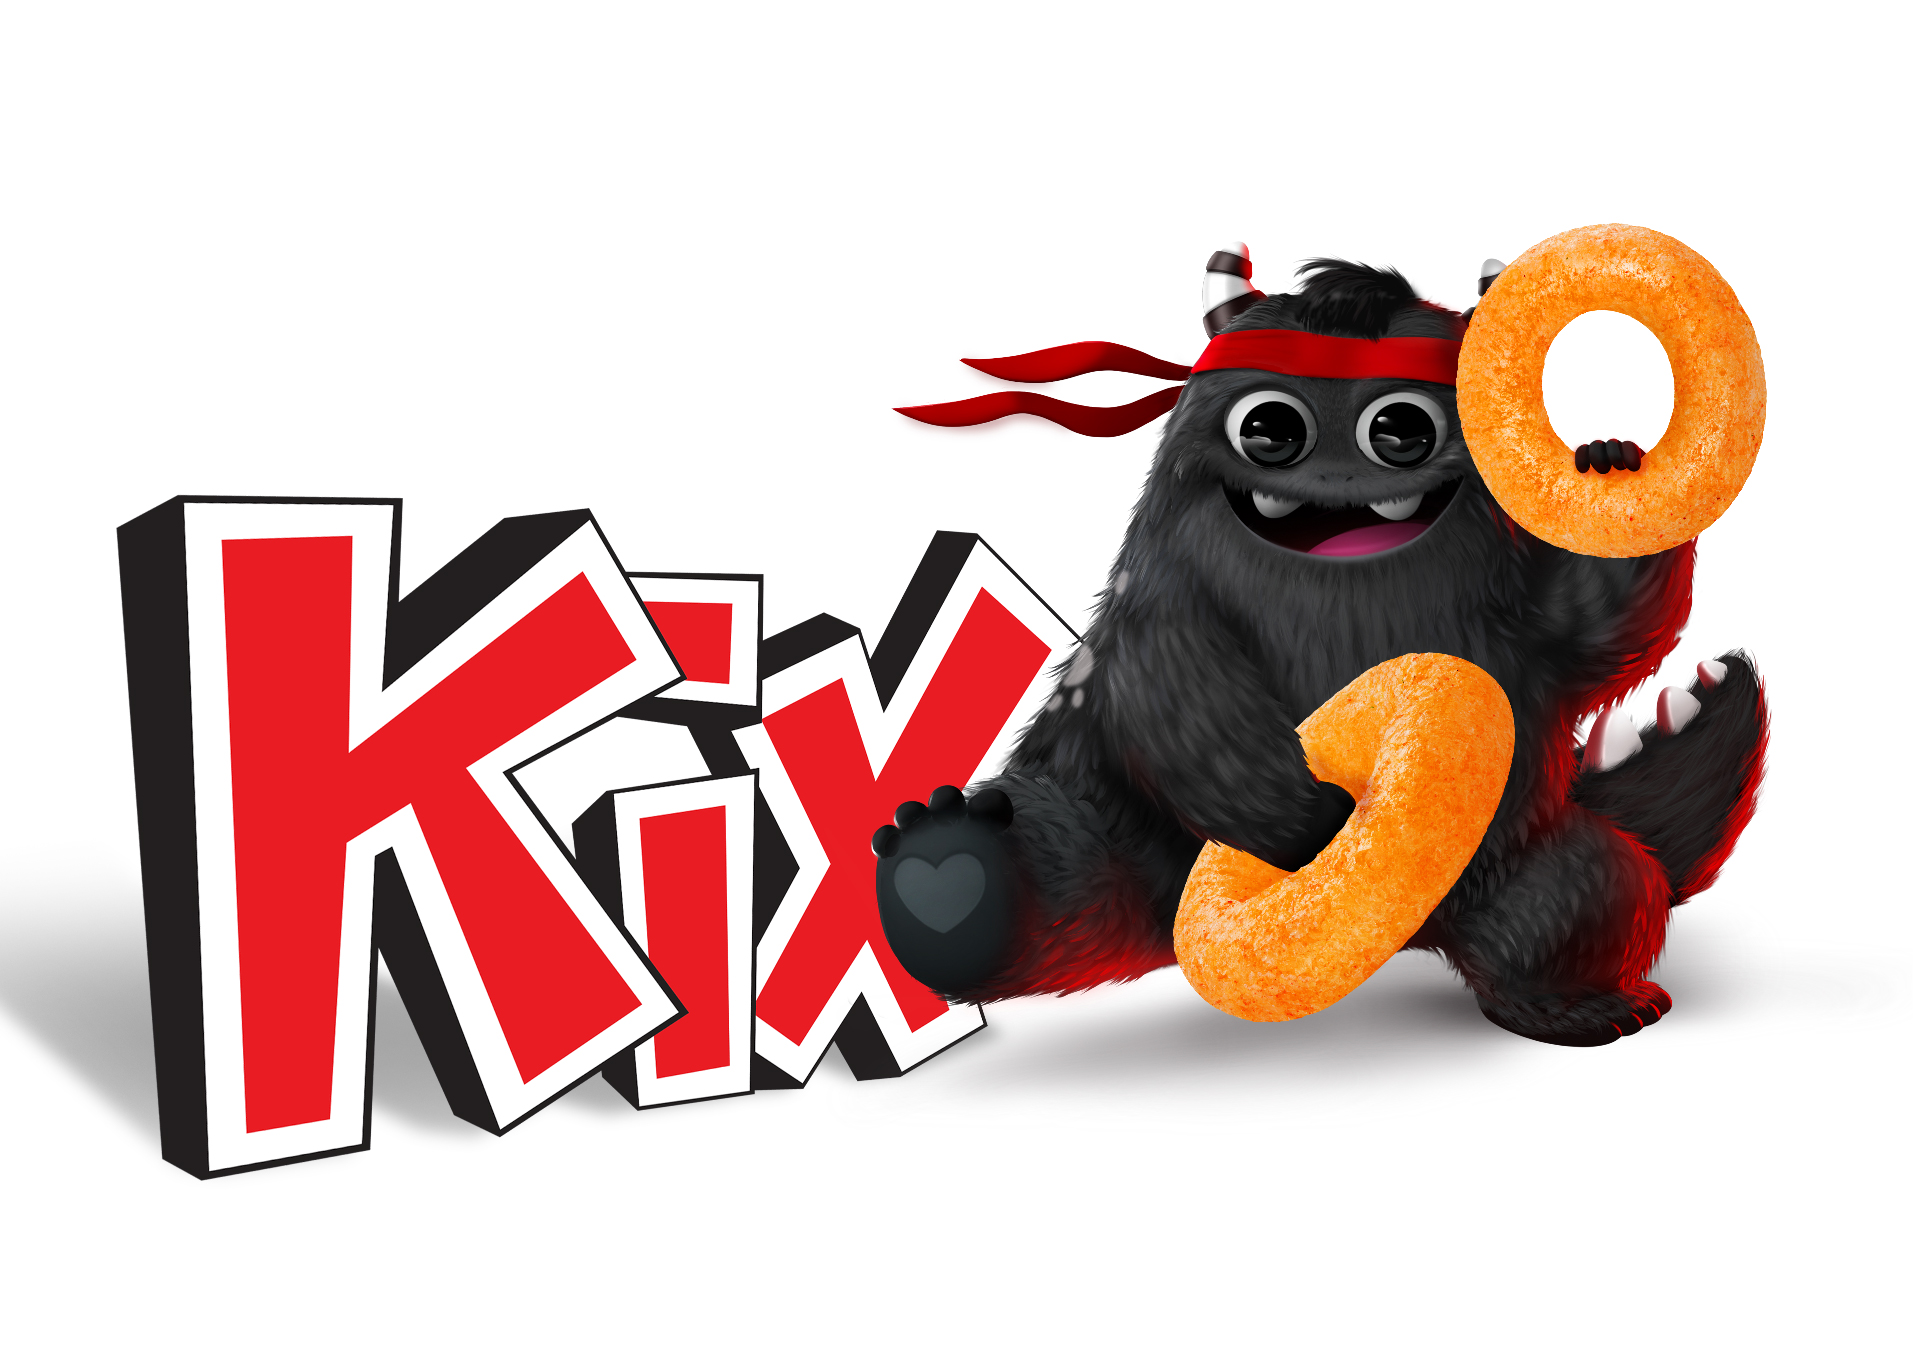 KIX – Packaging Of The World